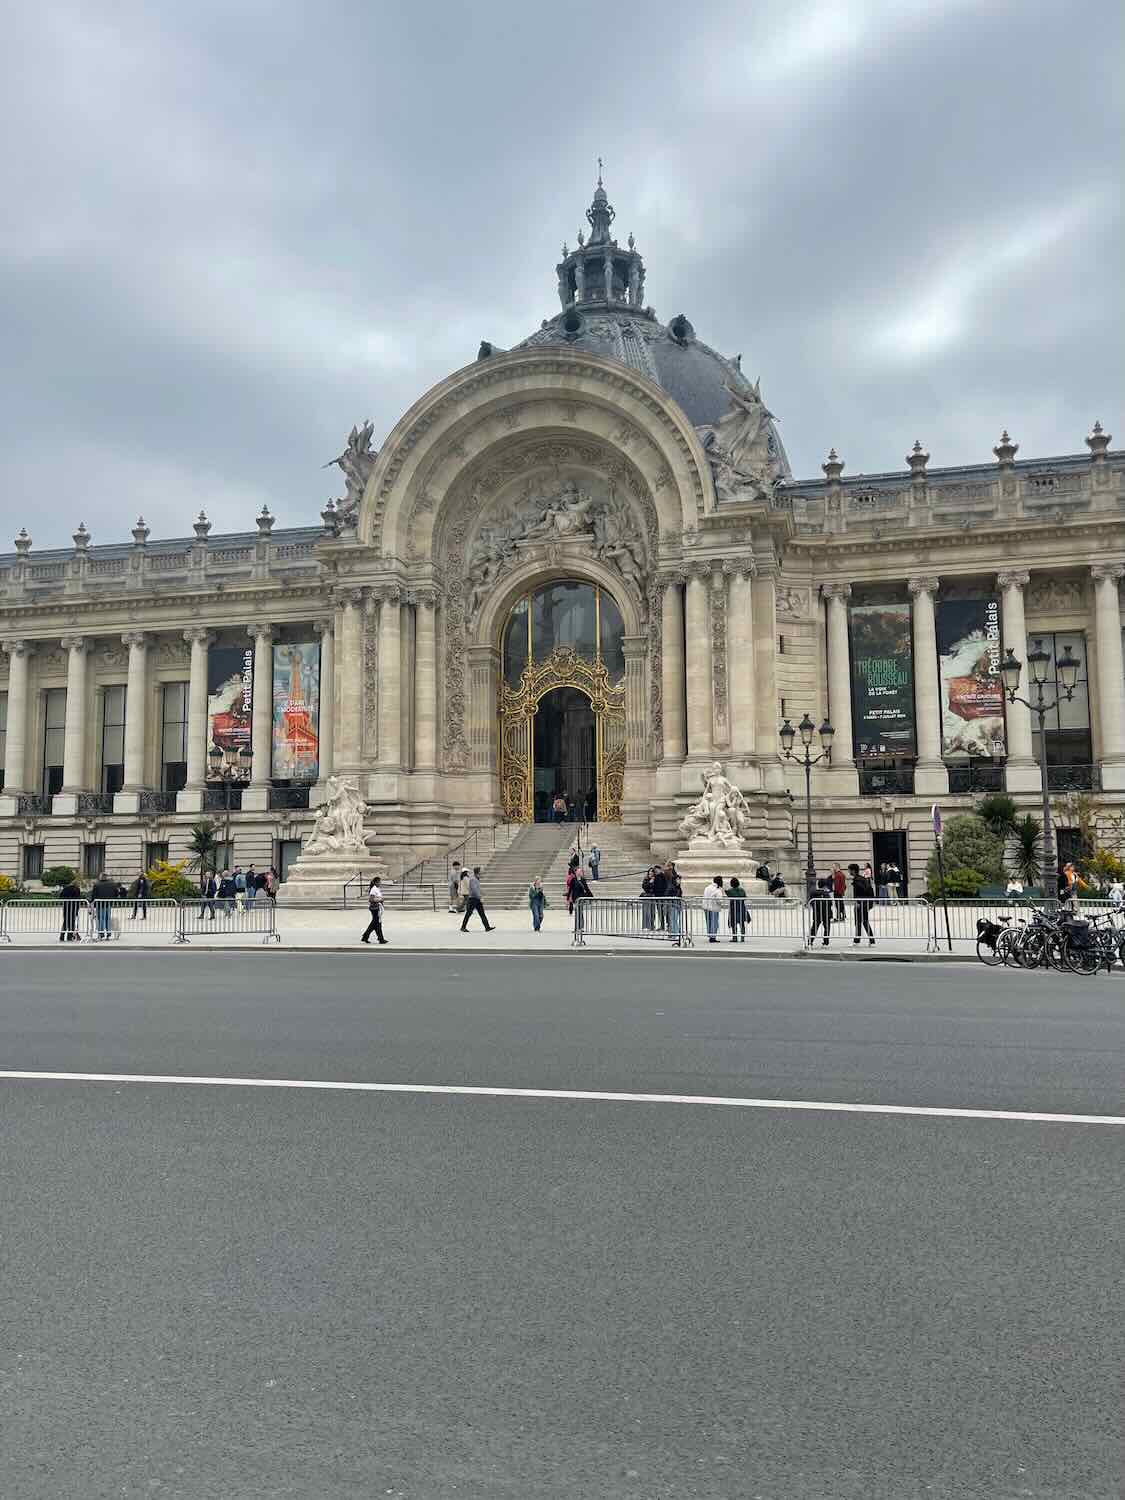 The grand entrance of the Petit Palais, featuring ornate architectural details and sculptures, under a cloudy sky, with pedestrians and cyclists passing by, reflecting the cultural richness of Paris.